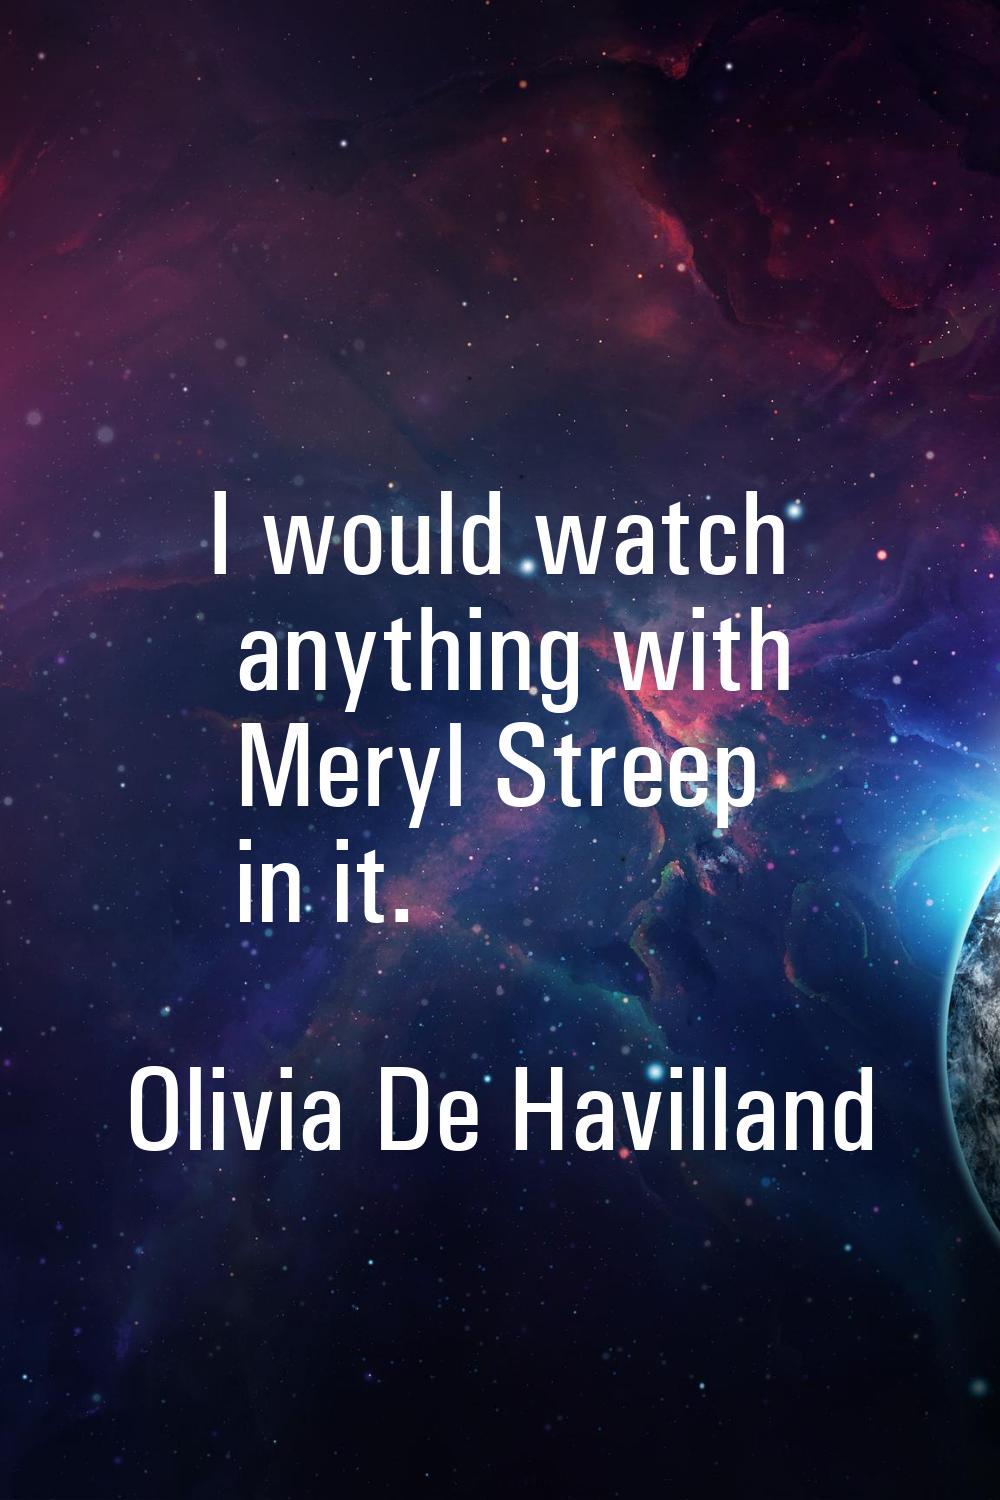 I would watch anything with Meryl Streep in it.